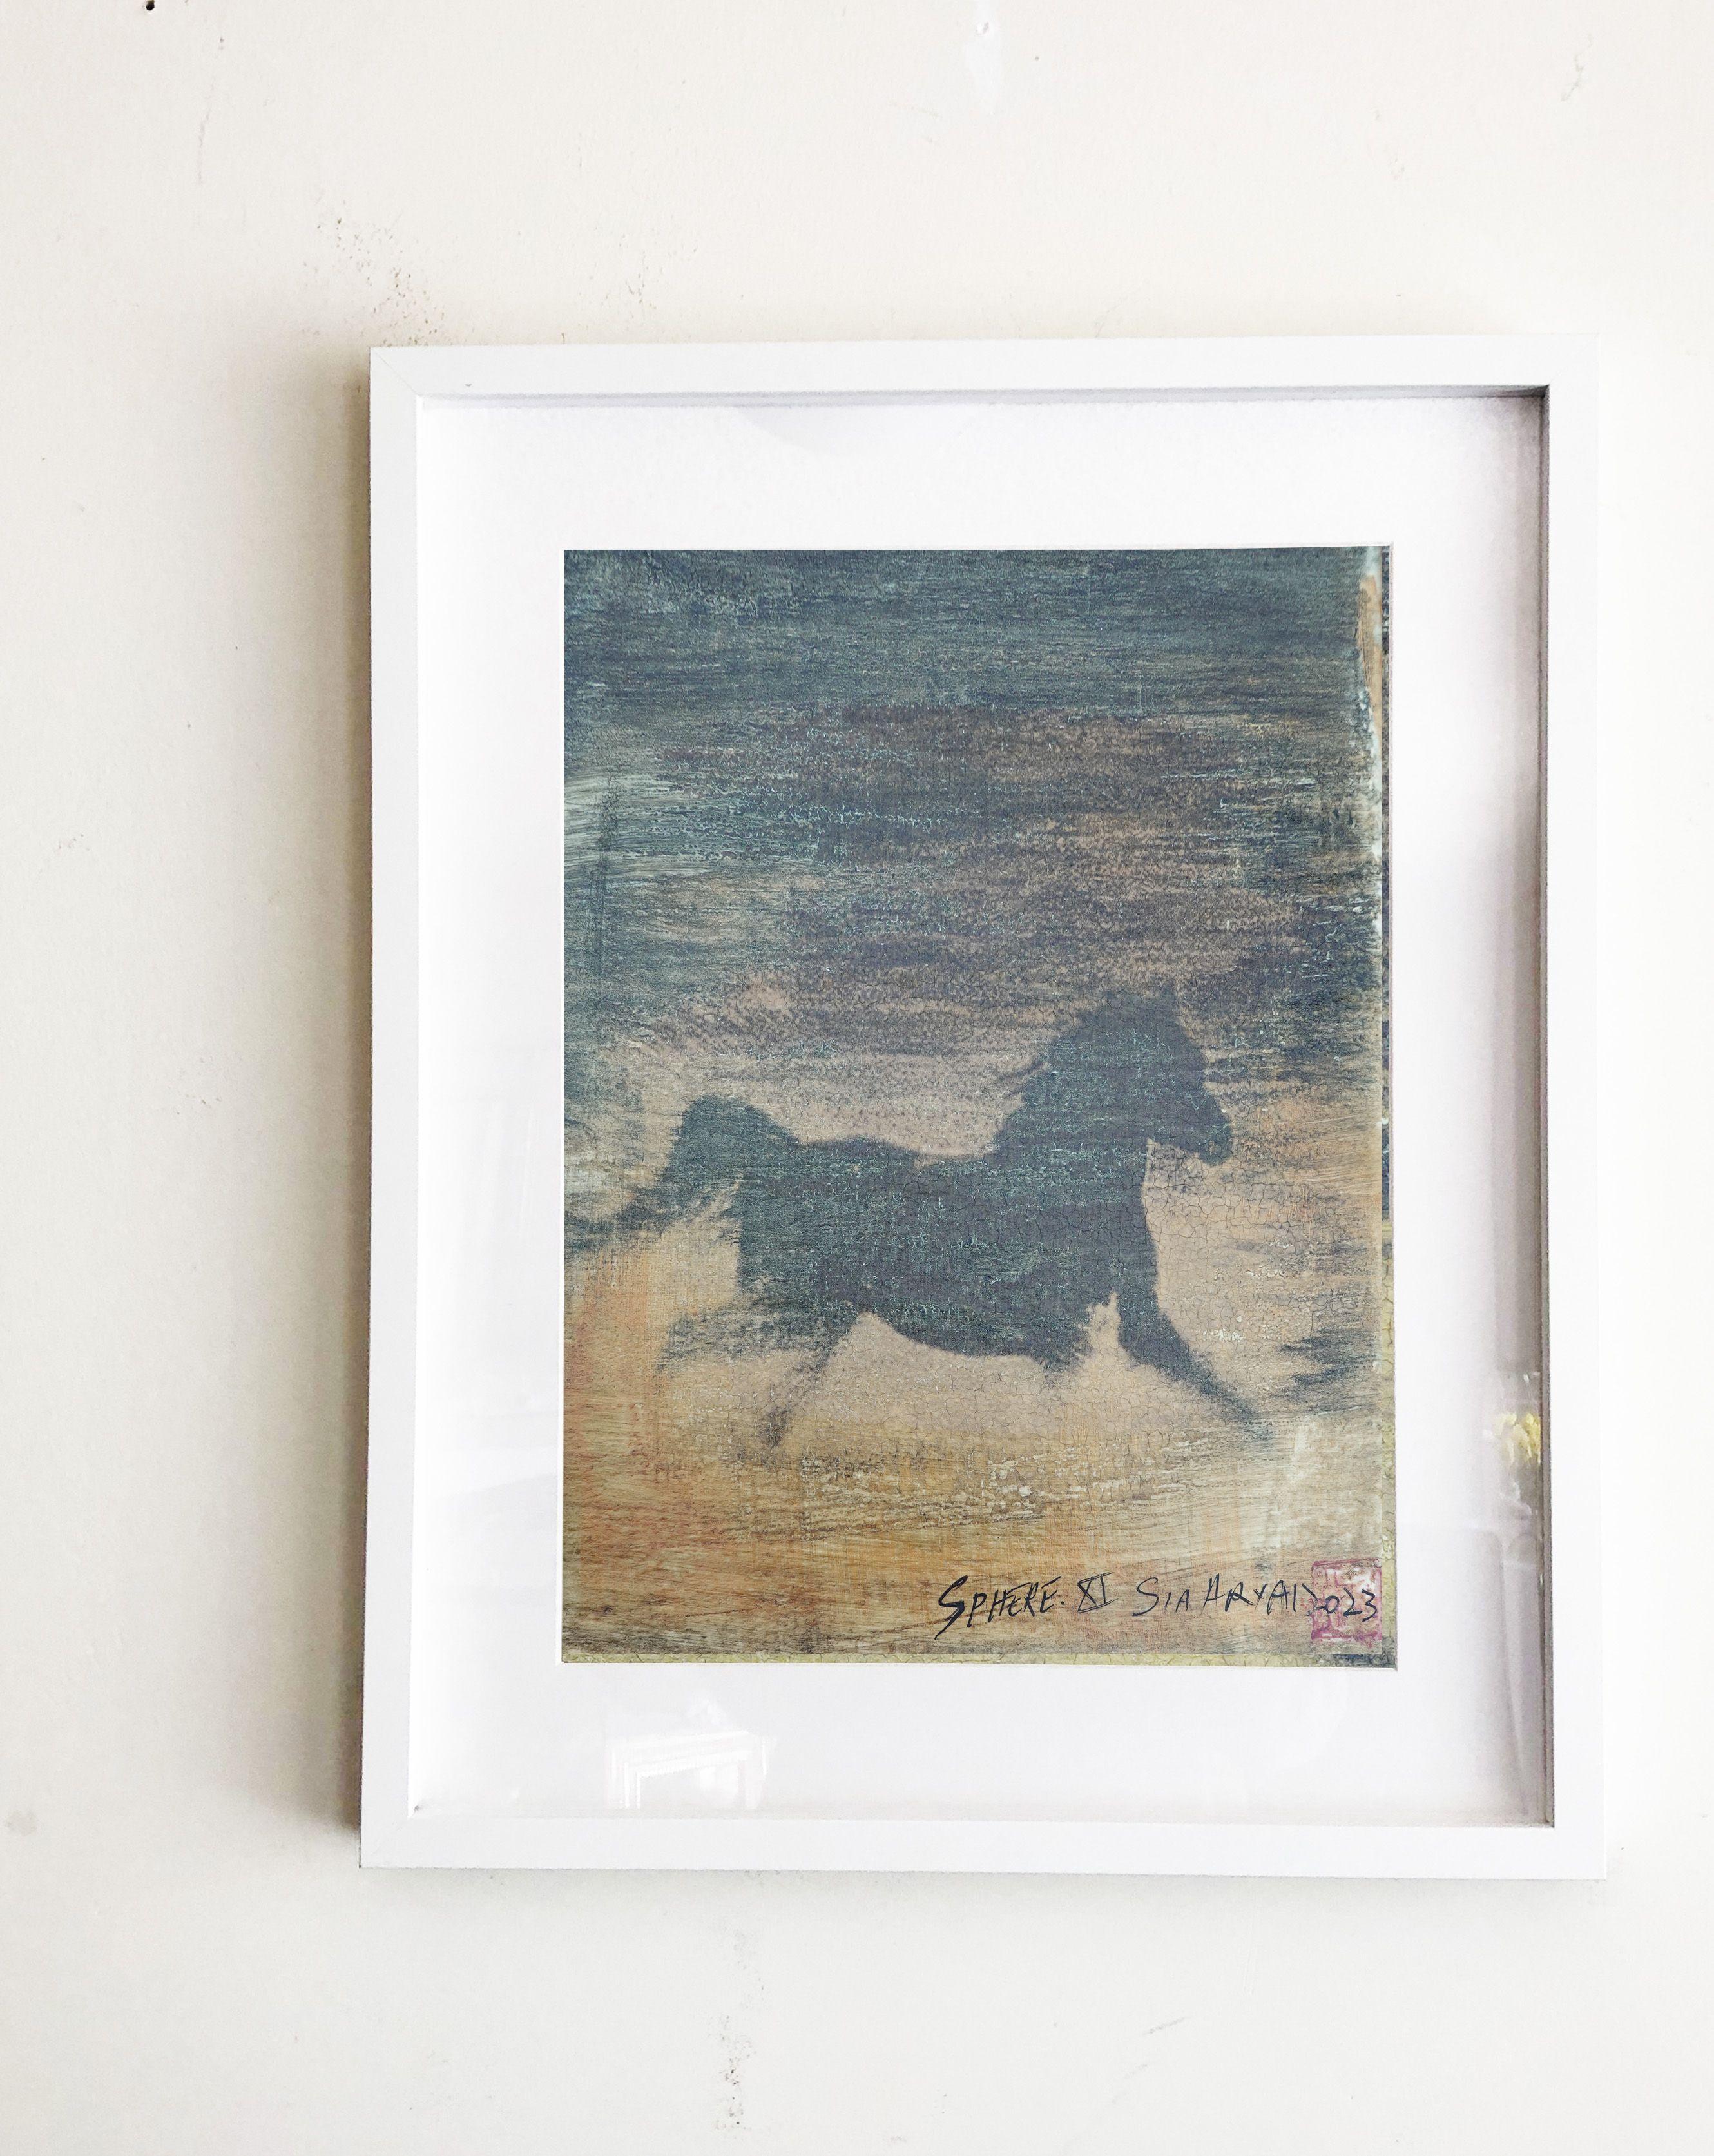 Sphere. XI Framed hand-painted gold stallion, Mixed Media on Paper - Surrealist Mixed Media Art by Sia Aryai